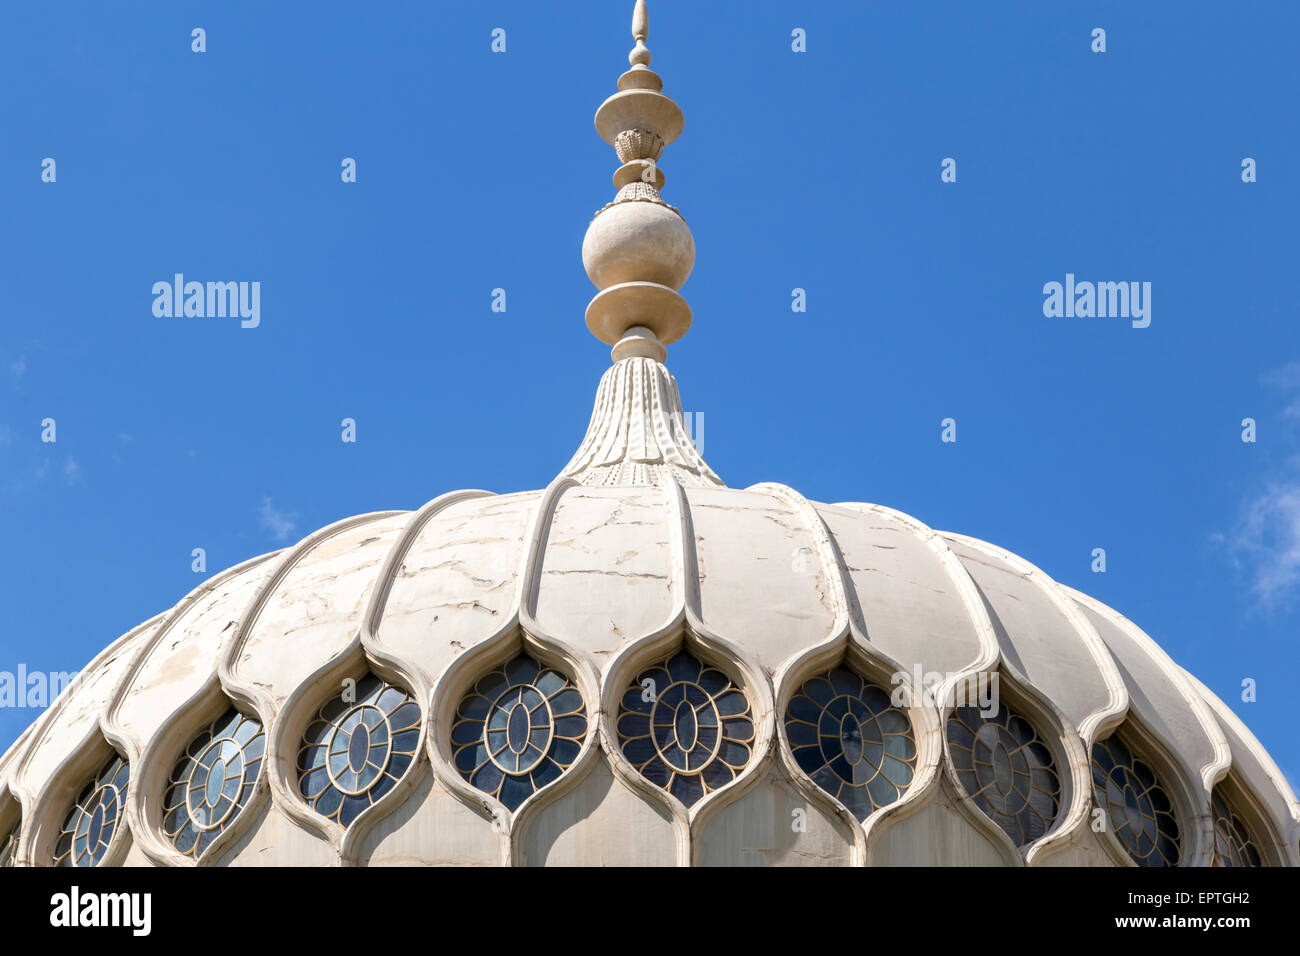 Detailed view of one of the ornate domes of the Royal Pavilion, a former royal residence in Brighton, East Sussex, England, UK. Stock Photo